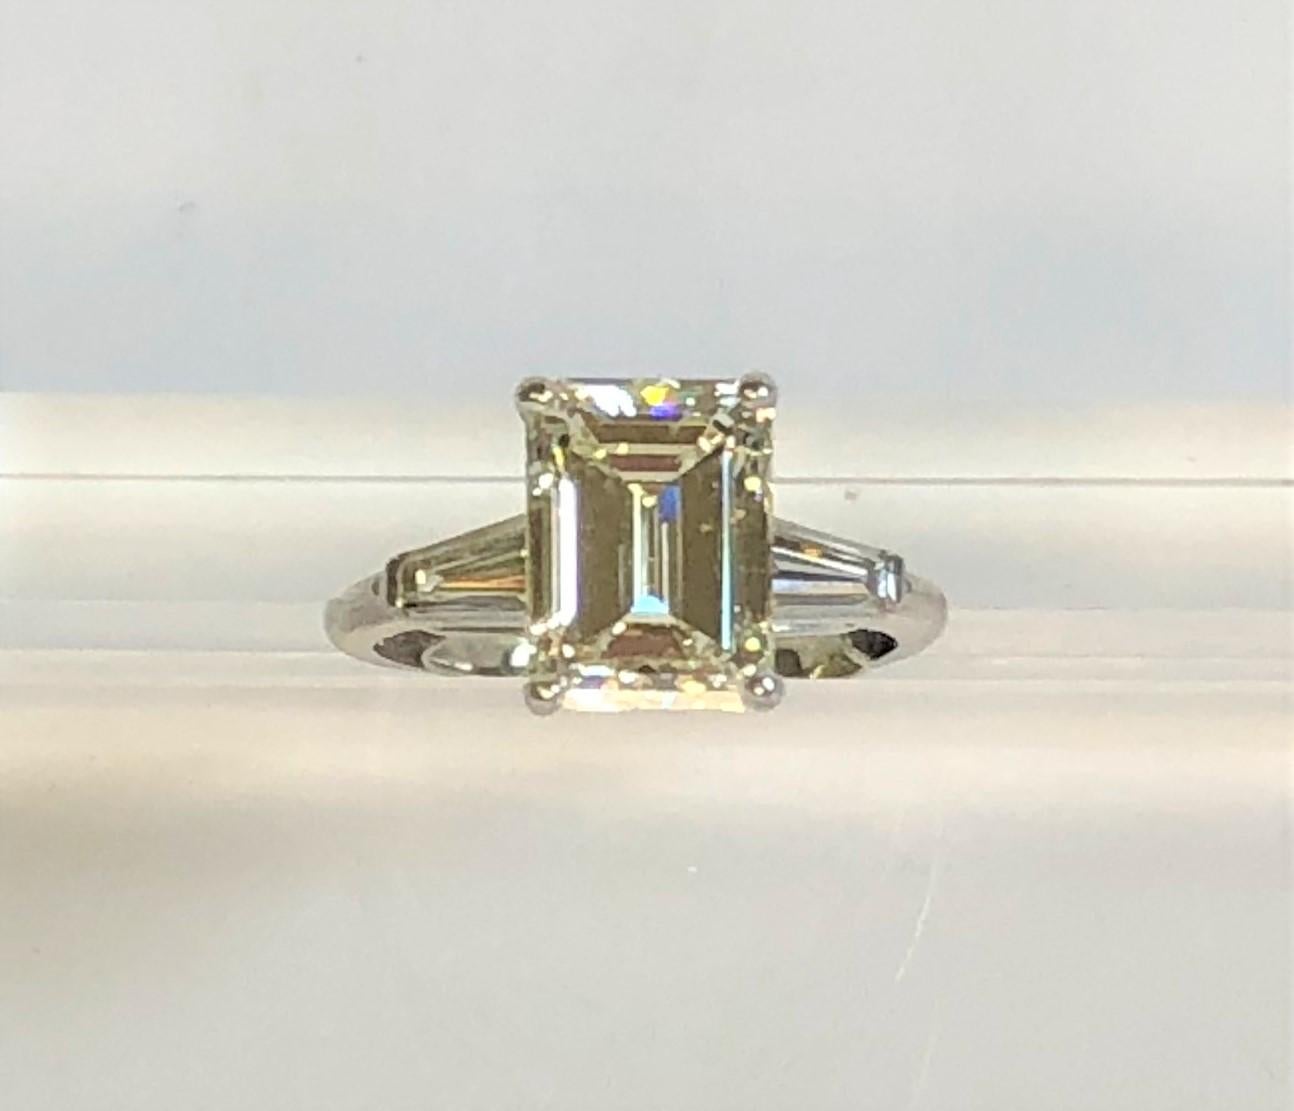 WOW this a great ring!- GIA Certified!!
3-stone platinum mounting with approximately 3.80 total diamond weight (estimated).
Handmade with serial number 35007 inside band
Middle emerald cut diamond approximately 10.6 X 7.5 X 5.06mm, approximately